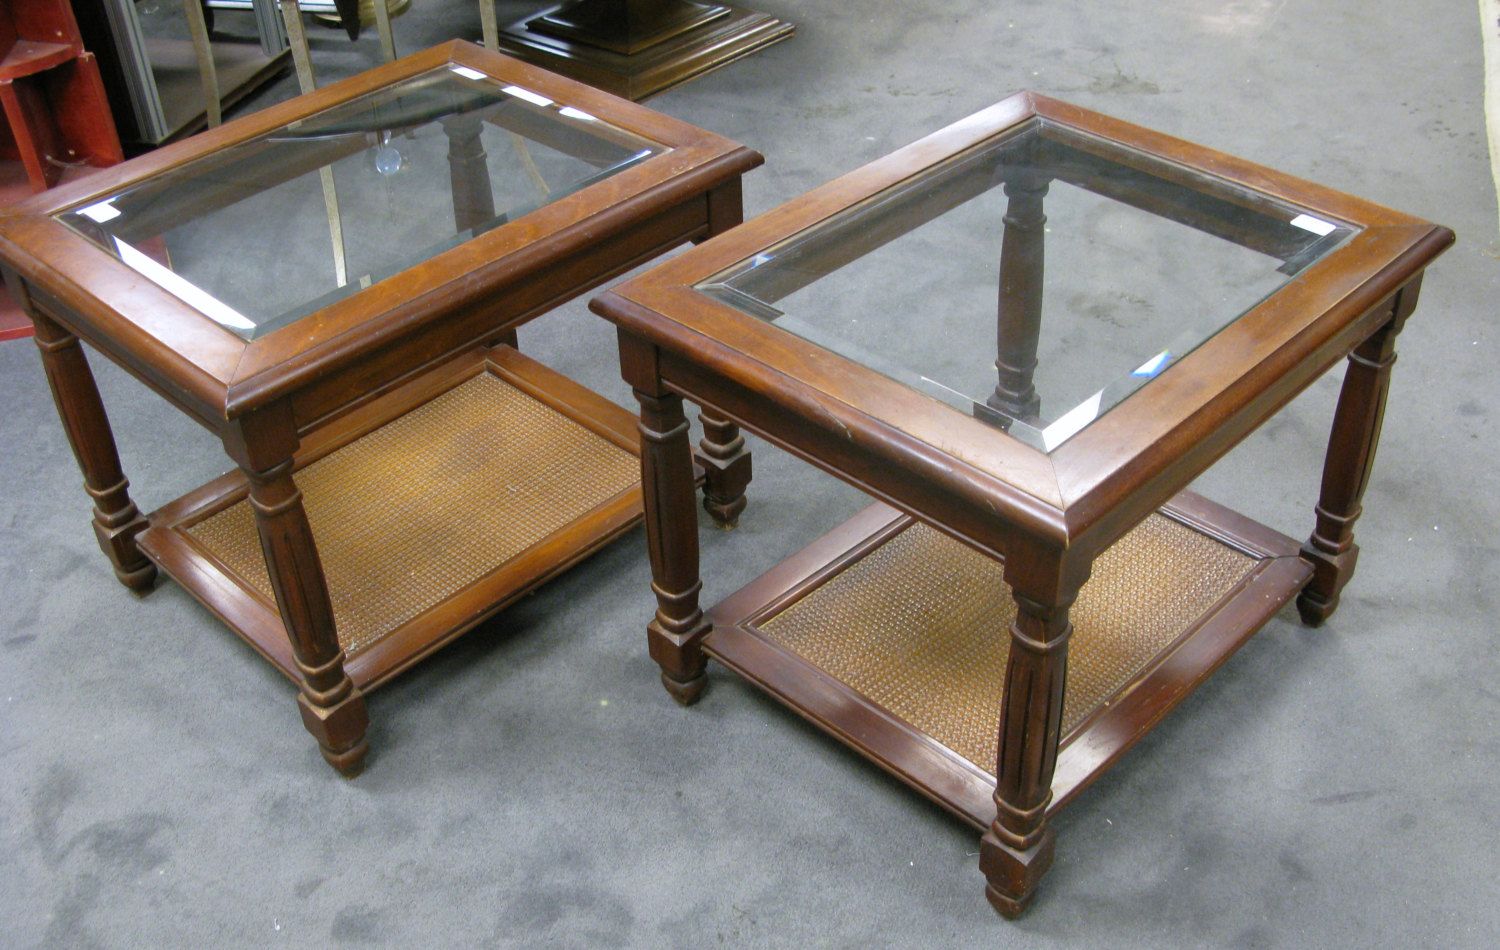 cherry wood end tables with glass top doces abobrinhas table blueprint can floor lamp rustic side diy pub set riverside furniture summerhill fixer upper line for less magnussen